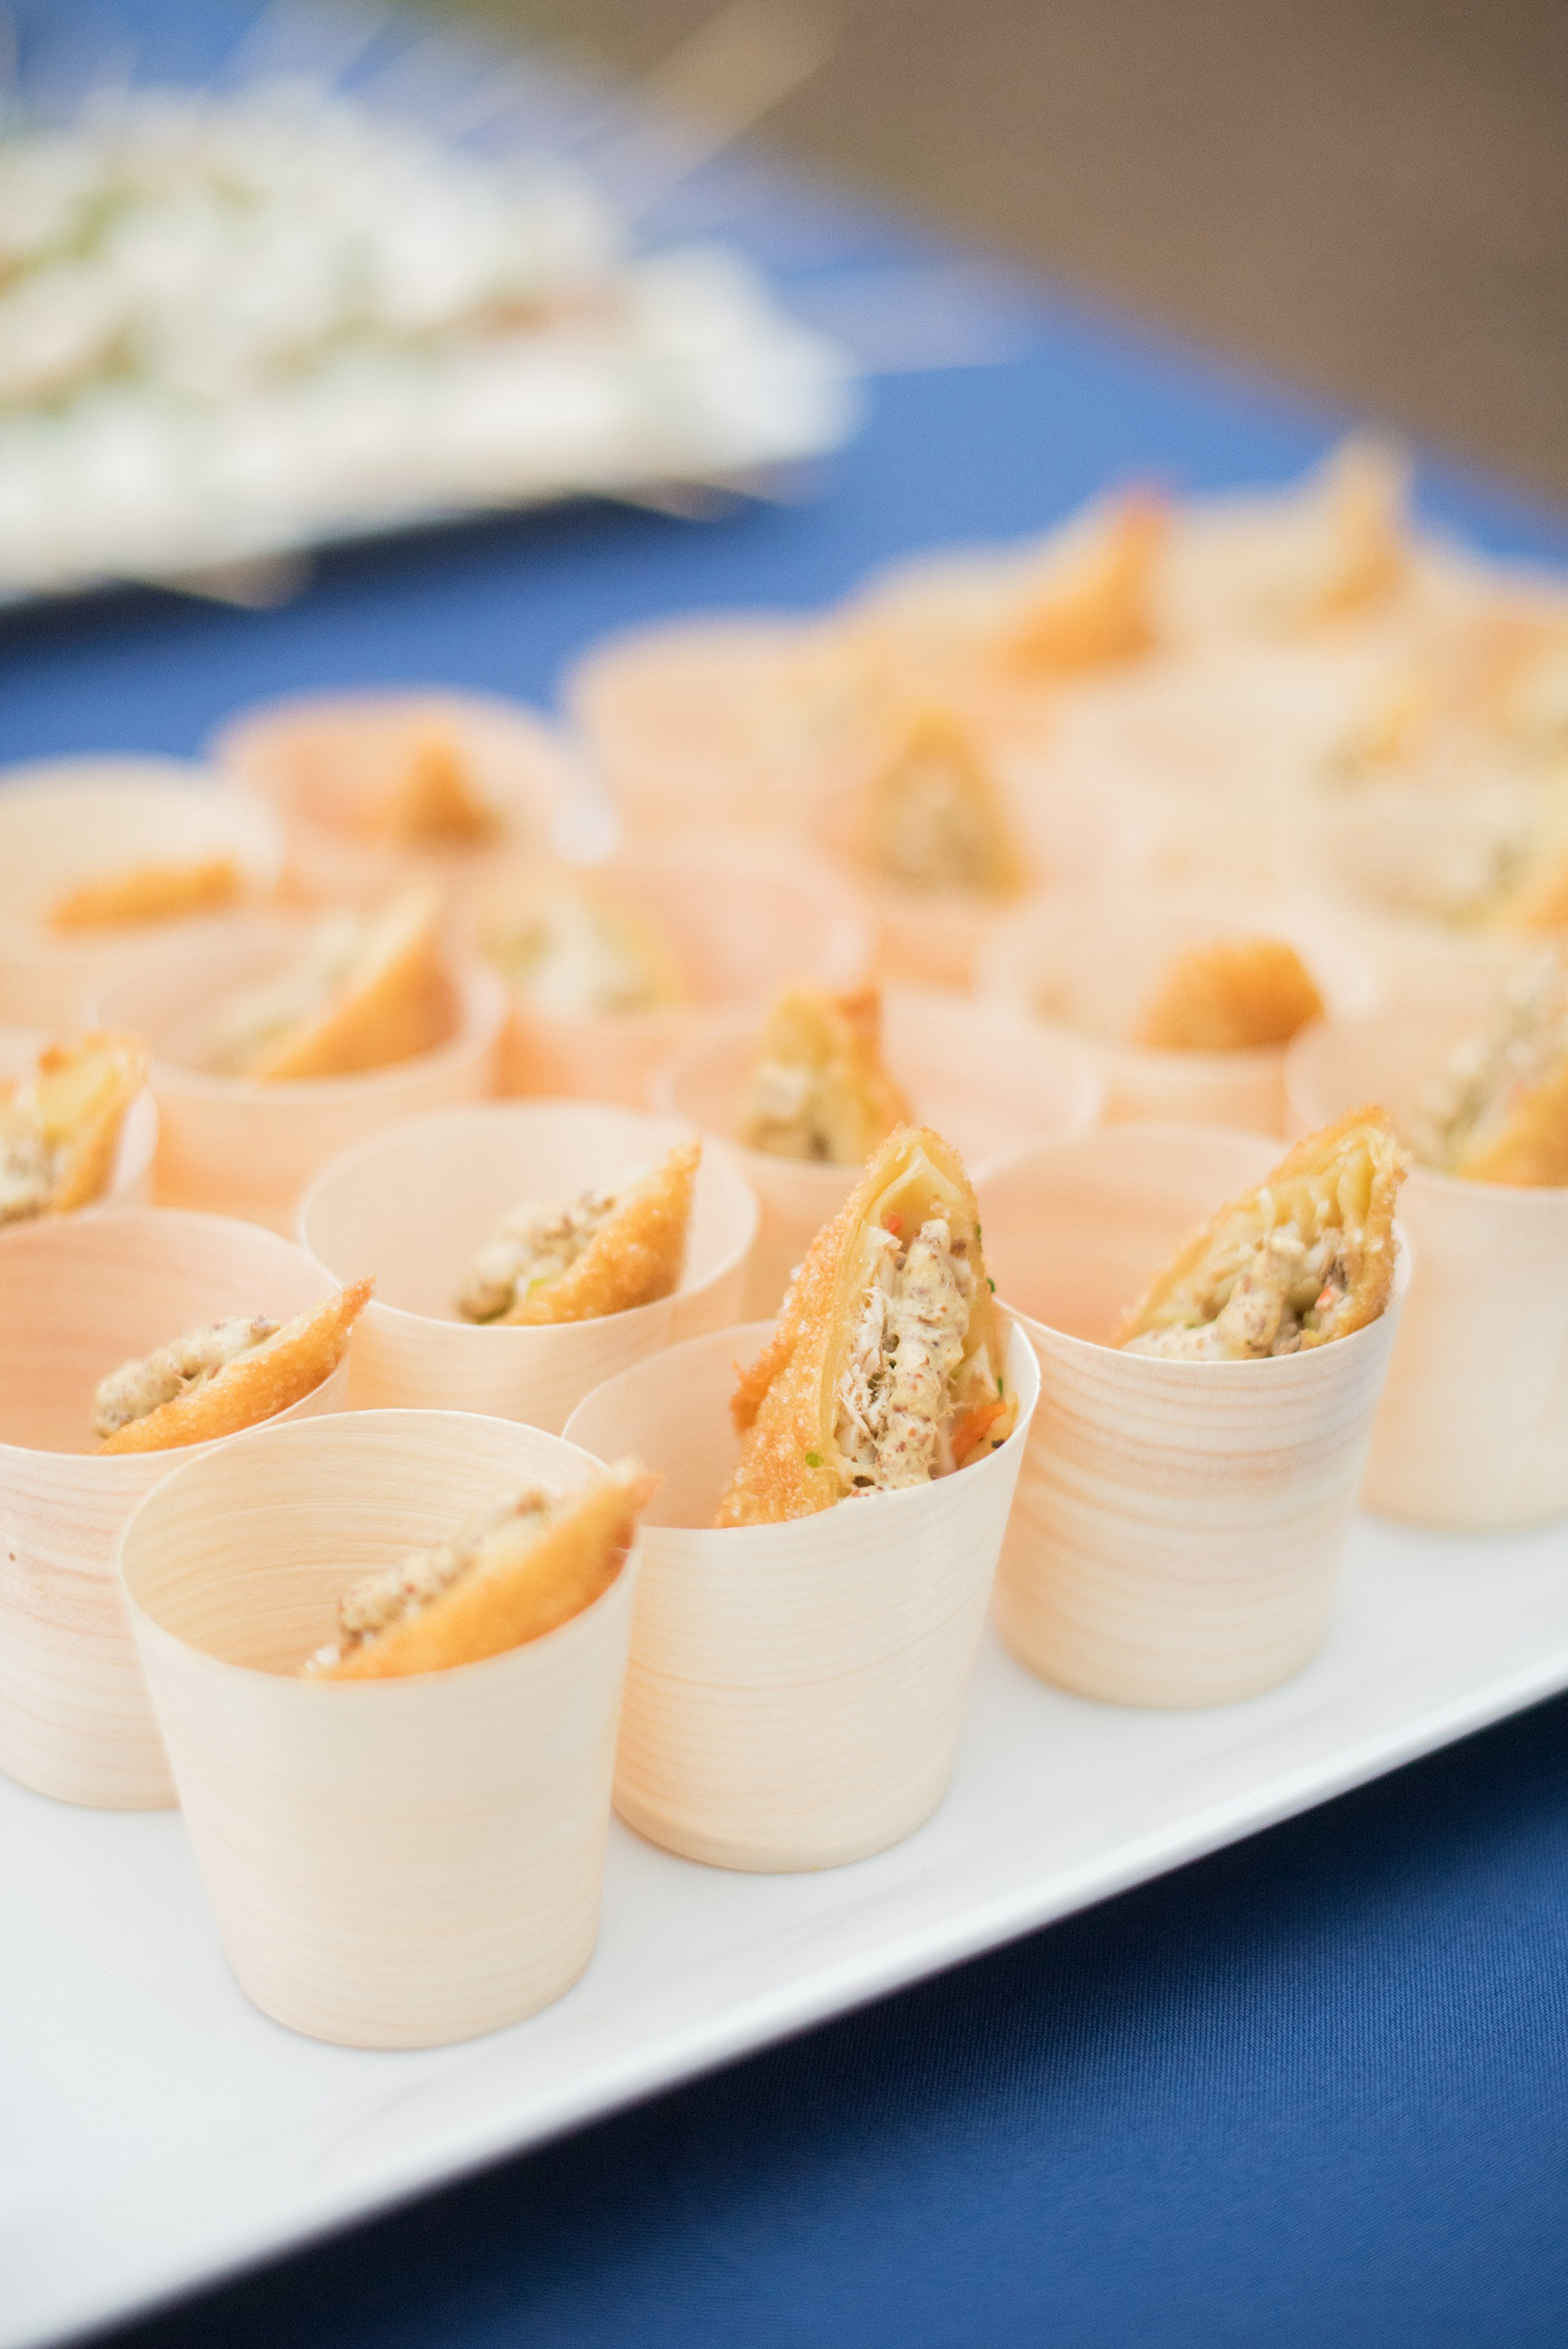 Mikkel Paige Photography photos from a wedding at Leslie-Alford Mims House in North Carolina. Picture of the bamboo cups with egg rolls by Belle's Catering for an hors d'oeuvres reception.